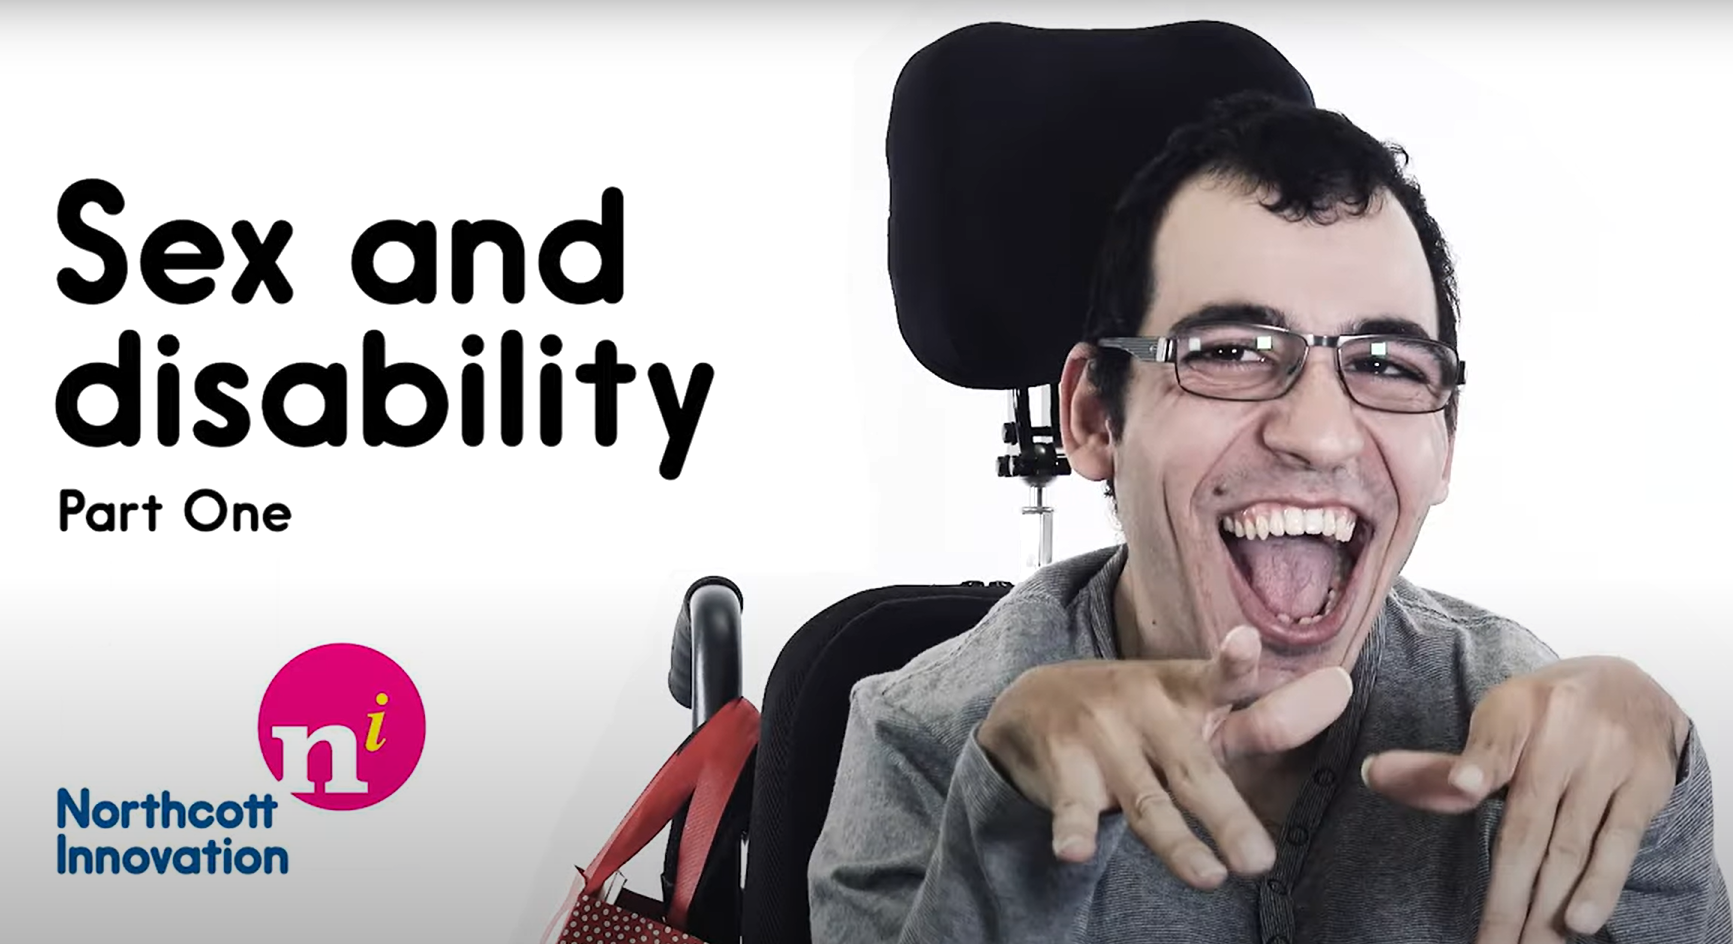 Cover Image for Sex and Disability Video featuring a masperson wearing glasses and in a chair smiling widely at the camera with their hands in front of them. There is tect on the image that reads: Sex and Disability Part One